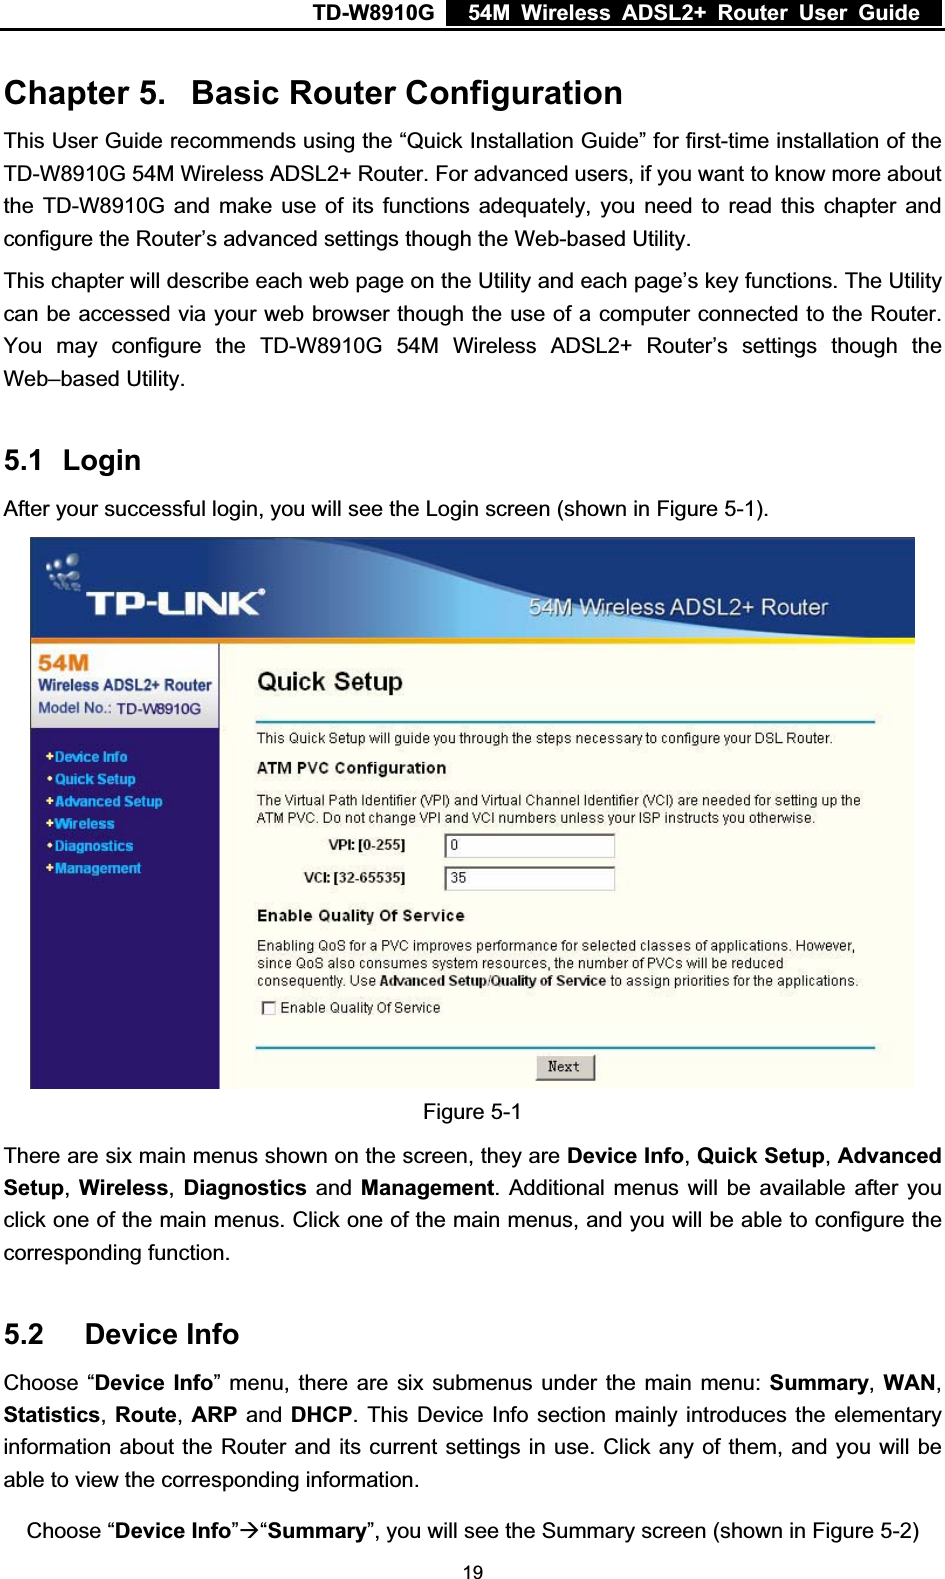 TD-W8910G    54M Wireless ADSL2+ Router User Guide  Chapter 5. Basic Router Configuration This User Guide recommends using the “Quick Installation Guide” for first-time installation of the TD-W8910G 54M Wireless ADSL2+ Router. For advanced users, if you want to know more about the TD-W8910G and make use of its functions adequately, you need to read this chapter and configure the Router’s advanced settings though the Web-based Utility. This chapter will describe each web page on the Utility and each page’s key functions. The Utility can be accessed via your web browser though the use of a computer connected to the Router. You may configure the TD-W8910G 54M Wireless ADSL2+ Router’s settings though the Web–based Utility. 5.1 LoginAfter your successful login, you will see the Login screen (shown in Figure 5-1).Figure 5-1 There are six main menus shown on the screen, they are Device Info,Quick Setup,Advanced Setup,Wireless,Diagnostics and Management. Additional menus will be available after you click one of the main menus. Click one of the main menus, and you will be able to configure the corresponding function. 5.2 Device Info Choose “Device Info” menu, there are six submenus under the main menu: Summary,WAN,Statistics, Route, ARP and DHCP. This Device Info section mainly introduces the elementary information about the Router and its current settings in use. Click any of them, and you will be able to view the corresponding information. Choose “Device Info”Æ“Summary”, you will see the Summary screen (shown in Figure 5-2) 19